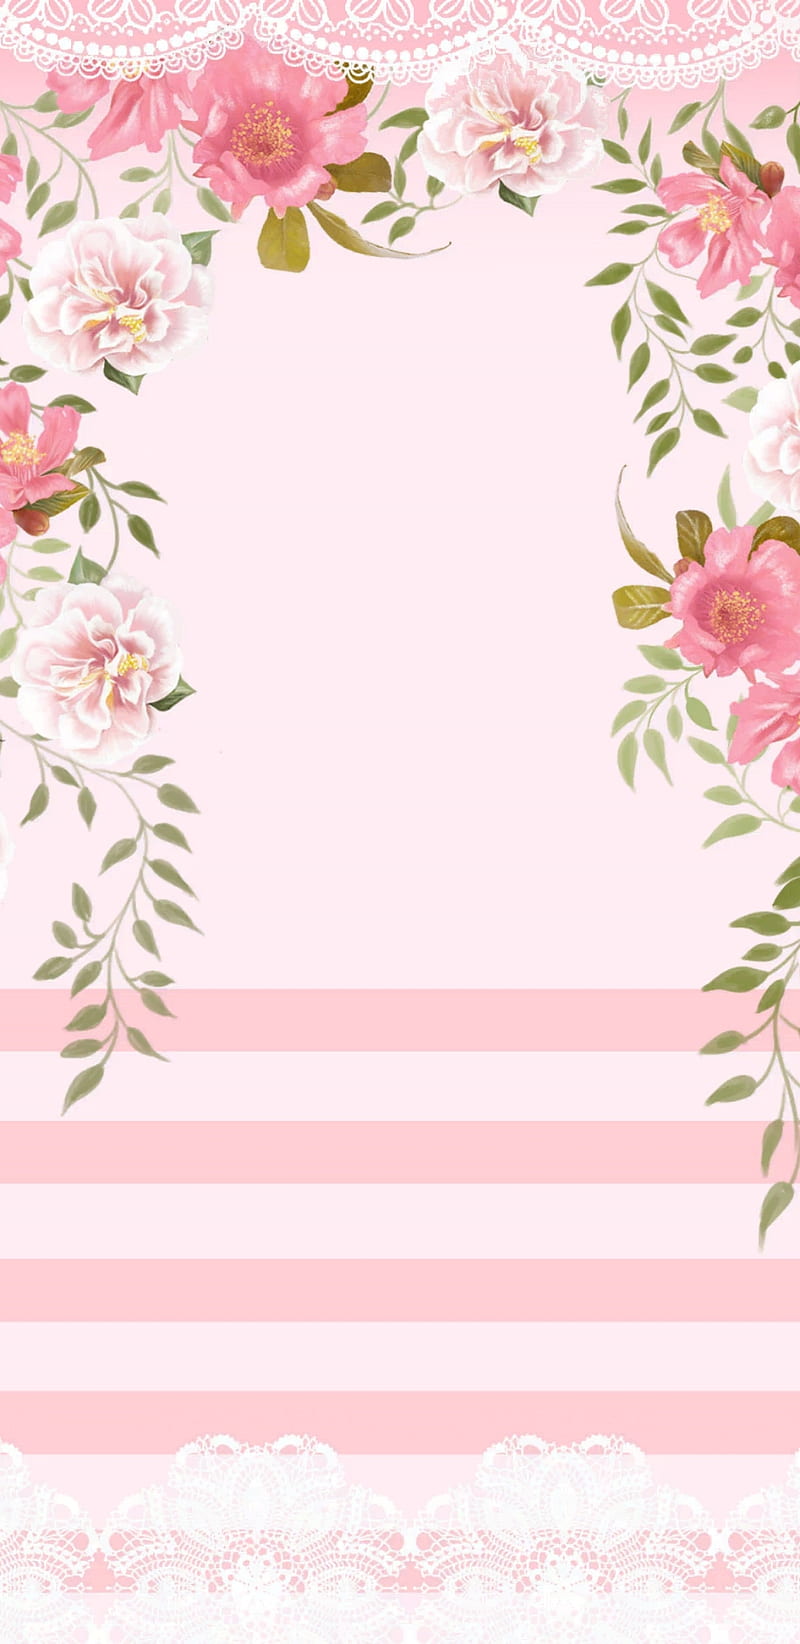 FloralEmbrace , floral, vintage, flowers, flower, painting, bonito, pretty, girly, love, pink, HD phone wallpaper